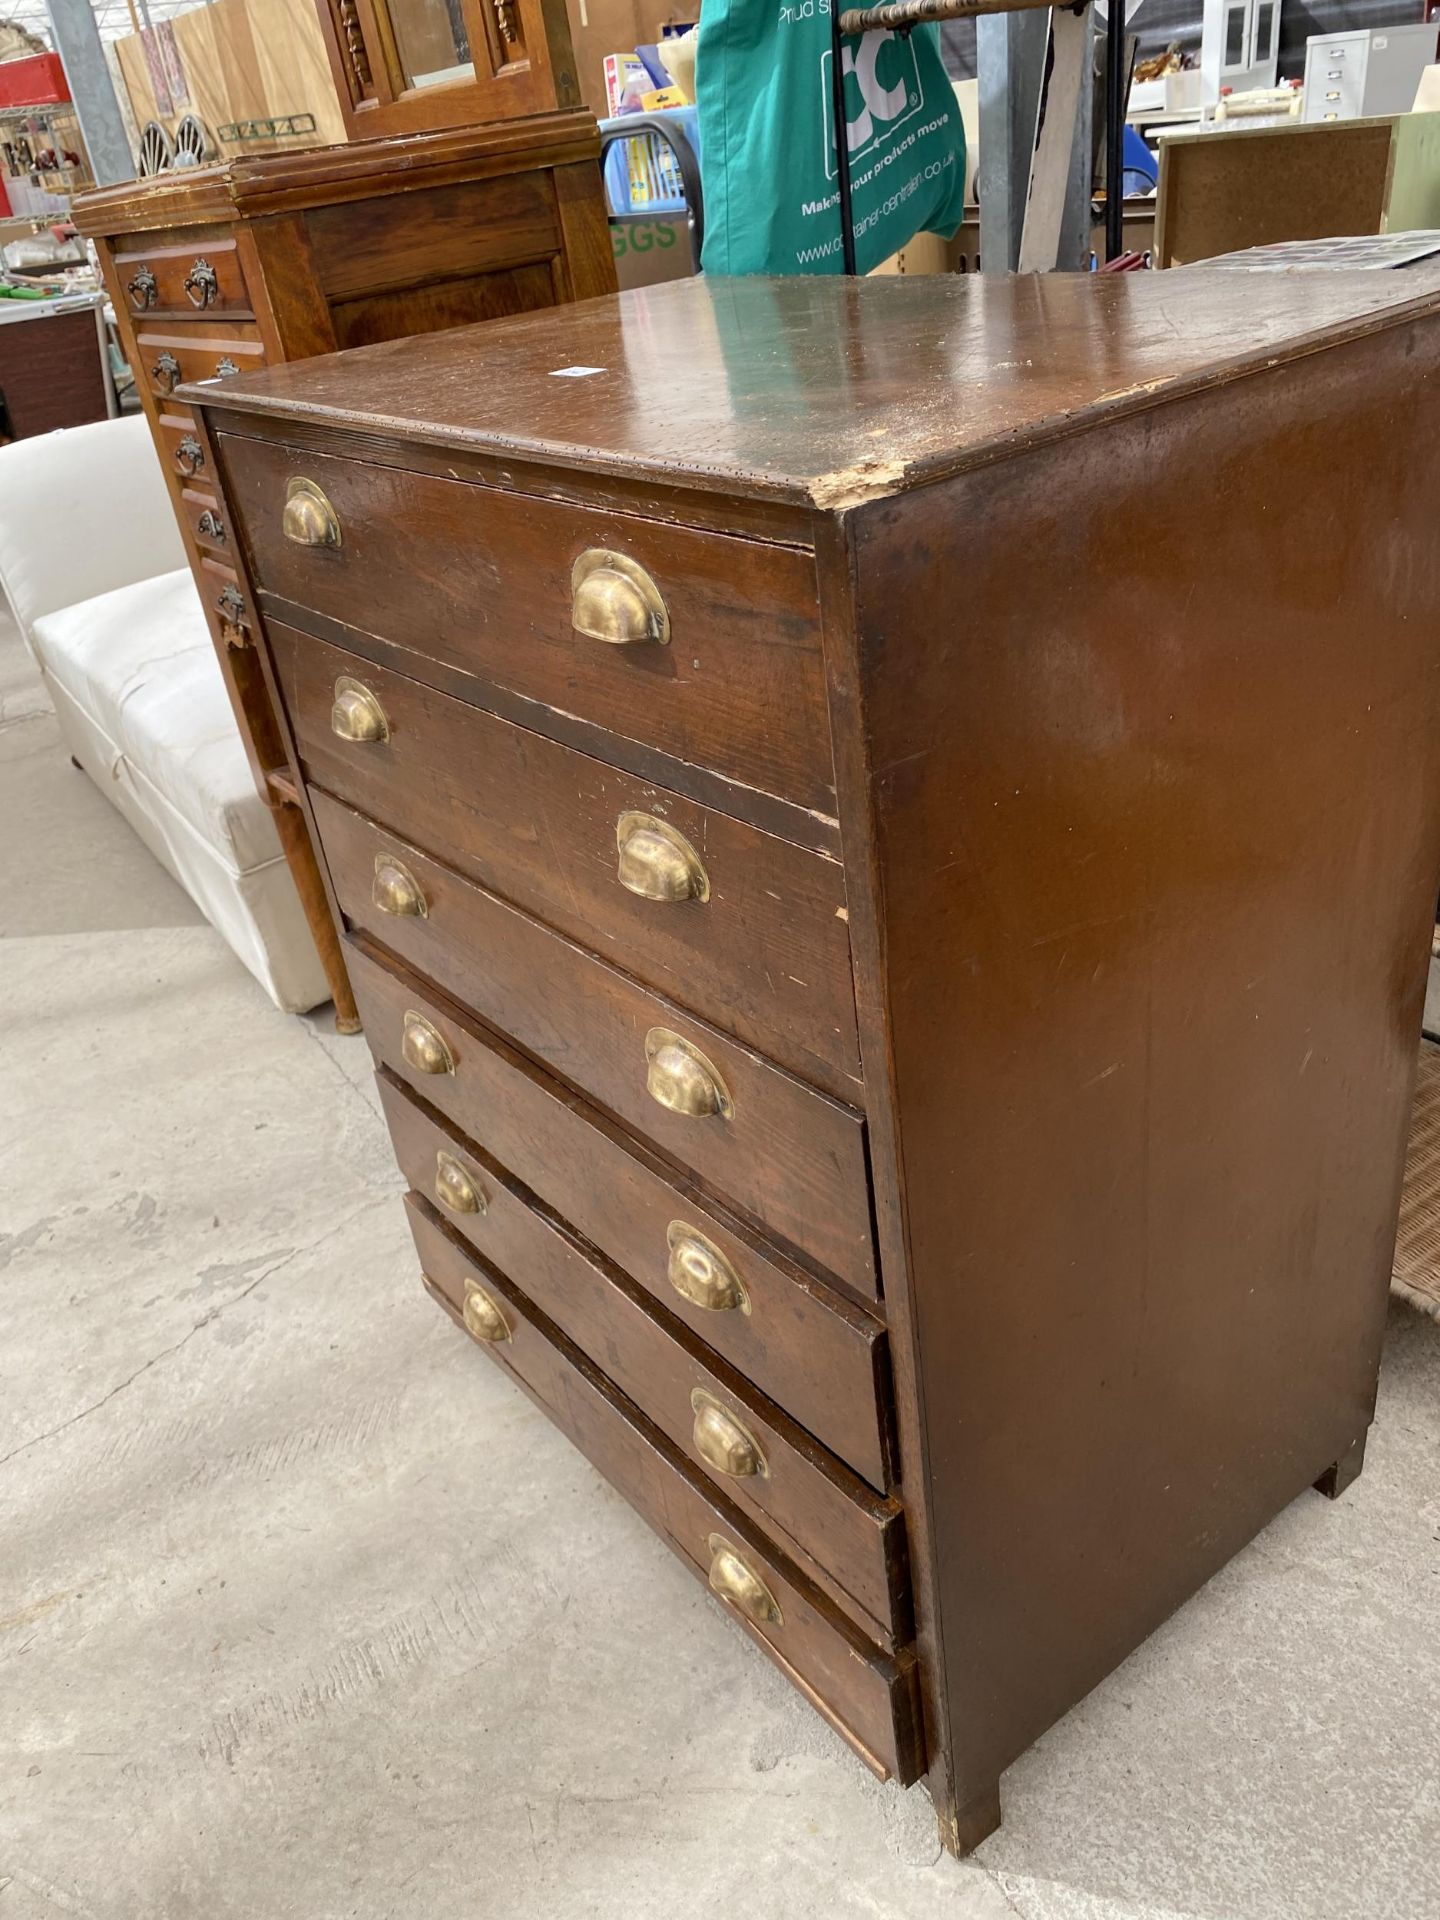 AN EARLY 20TH CENTURY STAINED PINE CHEST OF SIX DRAWERS WITH BRASS SCOOP HANDLES - Image 3 of 3